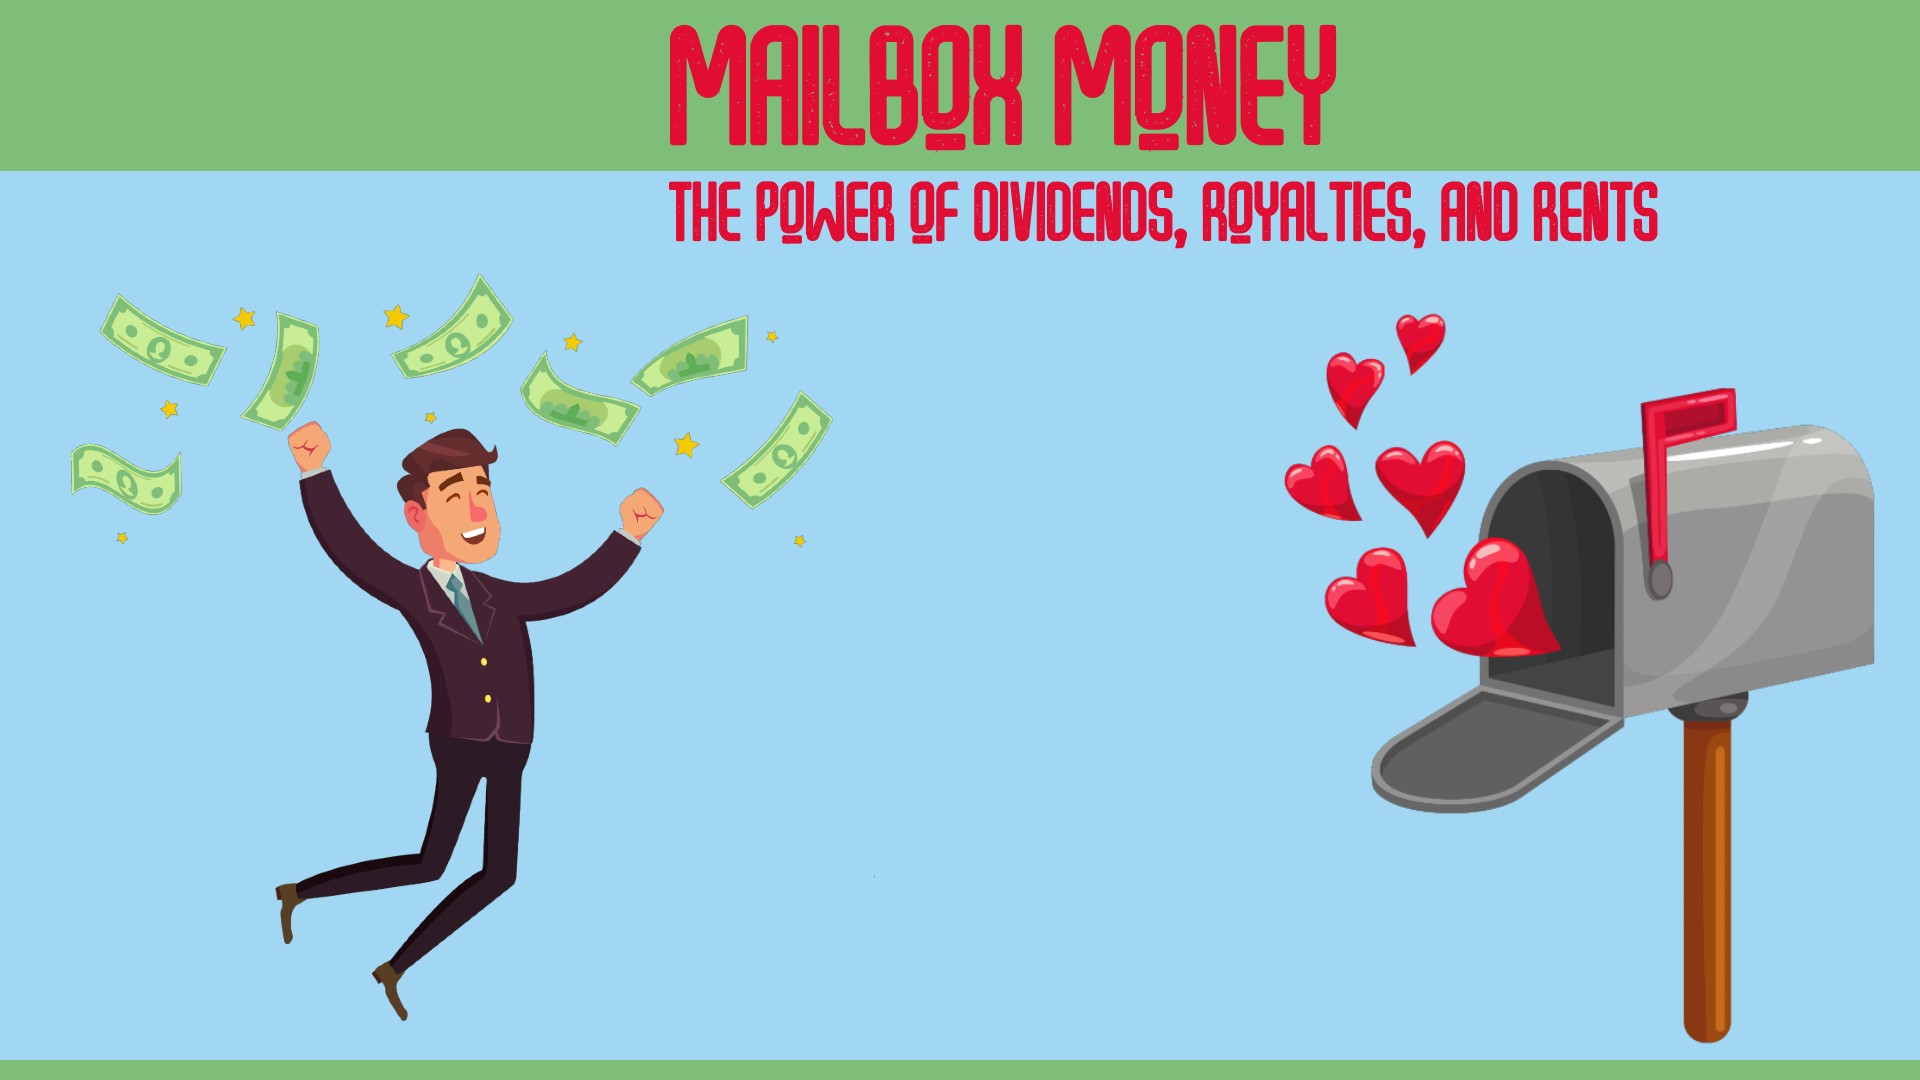 Mailbox Money: The Power of Dividends, Royalties, and Rents